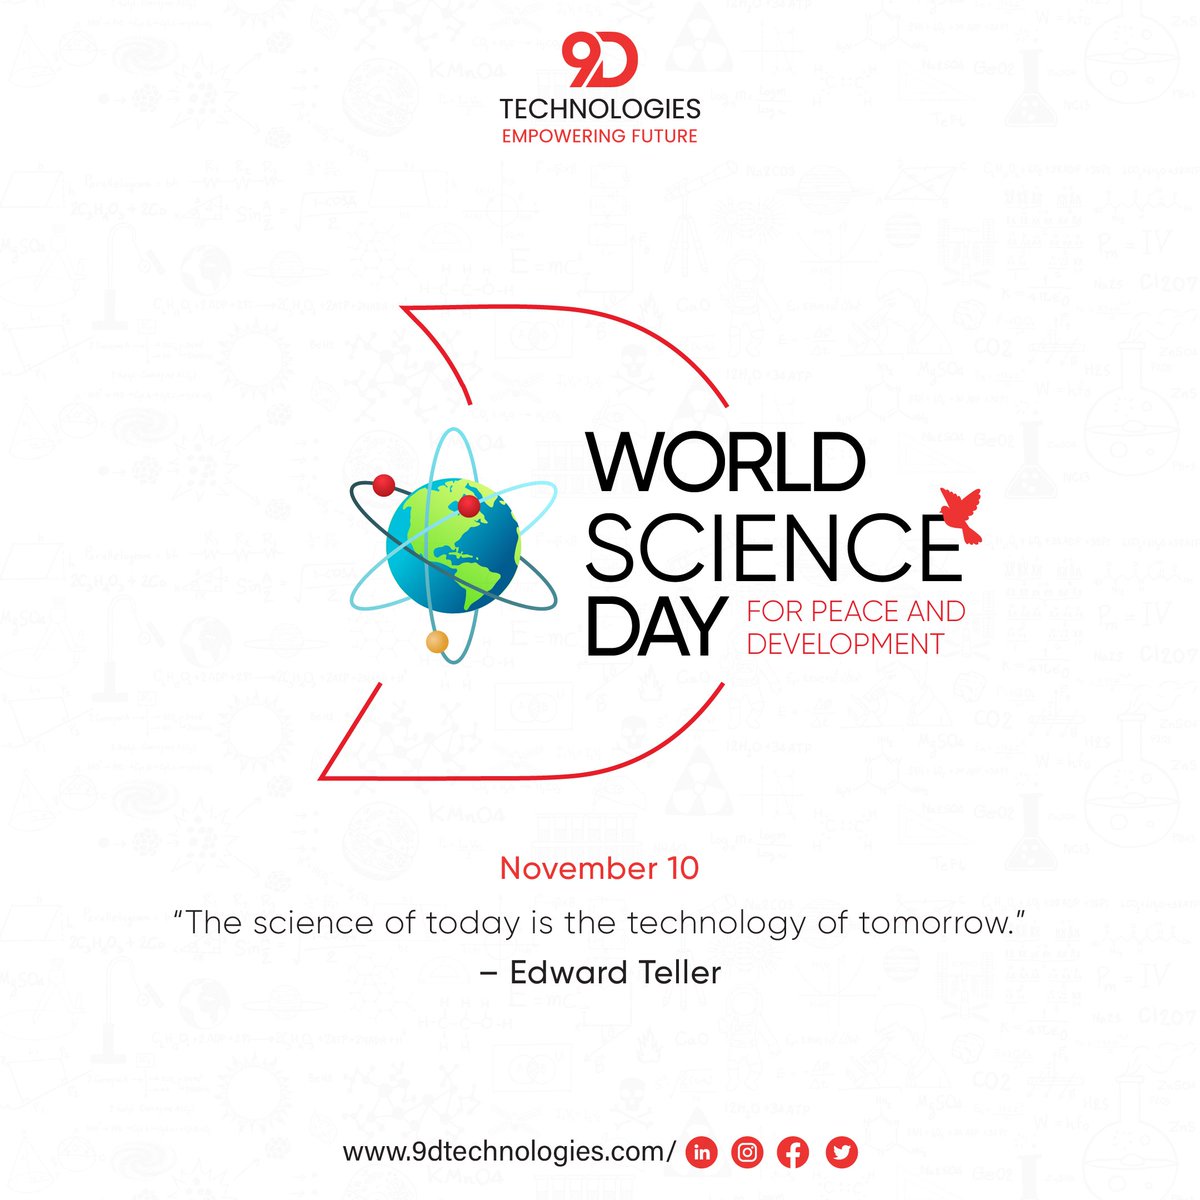 Celebrating #WorldScienceDay for Peace and Development! 🌐🔬

Let's harness the power of science for a better world, fostering peace and sustainable development.

#ScienceForPeace #InnovationForChange #GlobalDevelopment #SDGs #ScienceMatters #9dtechnologies